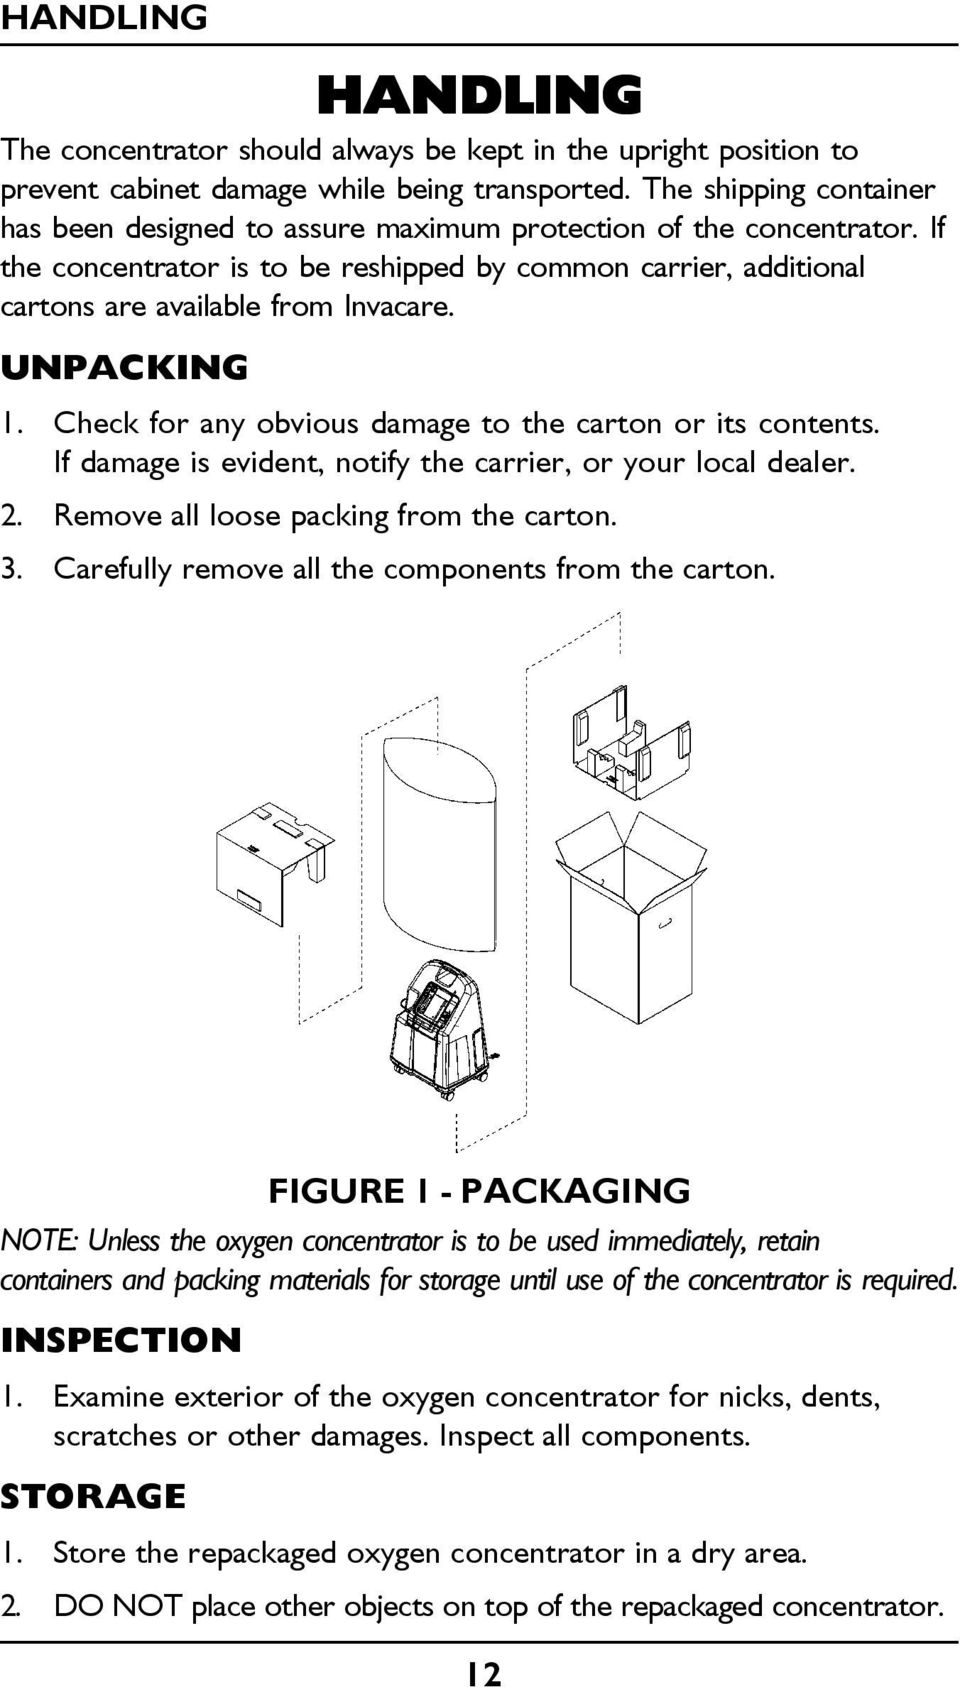 UNPACKING 1. Check for any obvious damage to the carton or its contents. If damage is evident, notify the carrier, or your local dealer. 2. Remove all loose packing from the carton. 3.